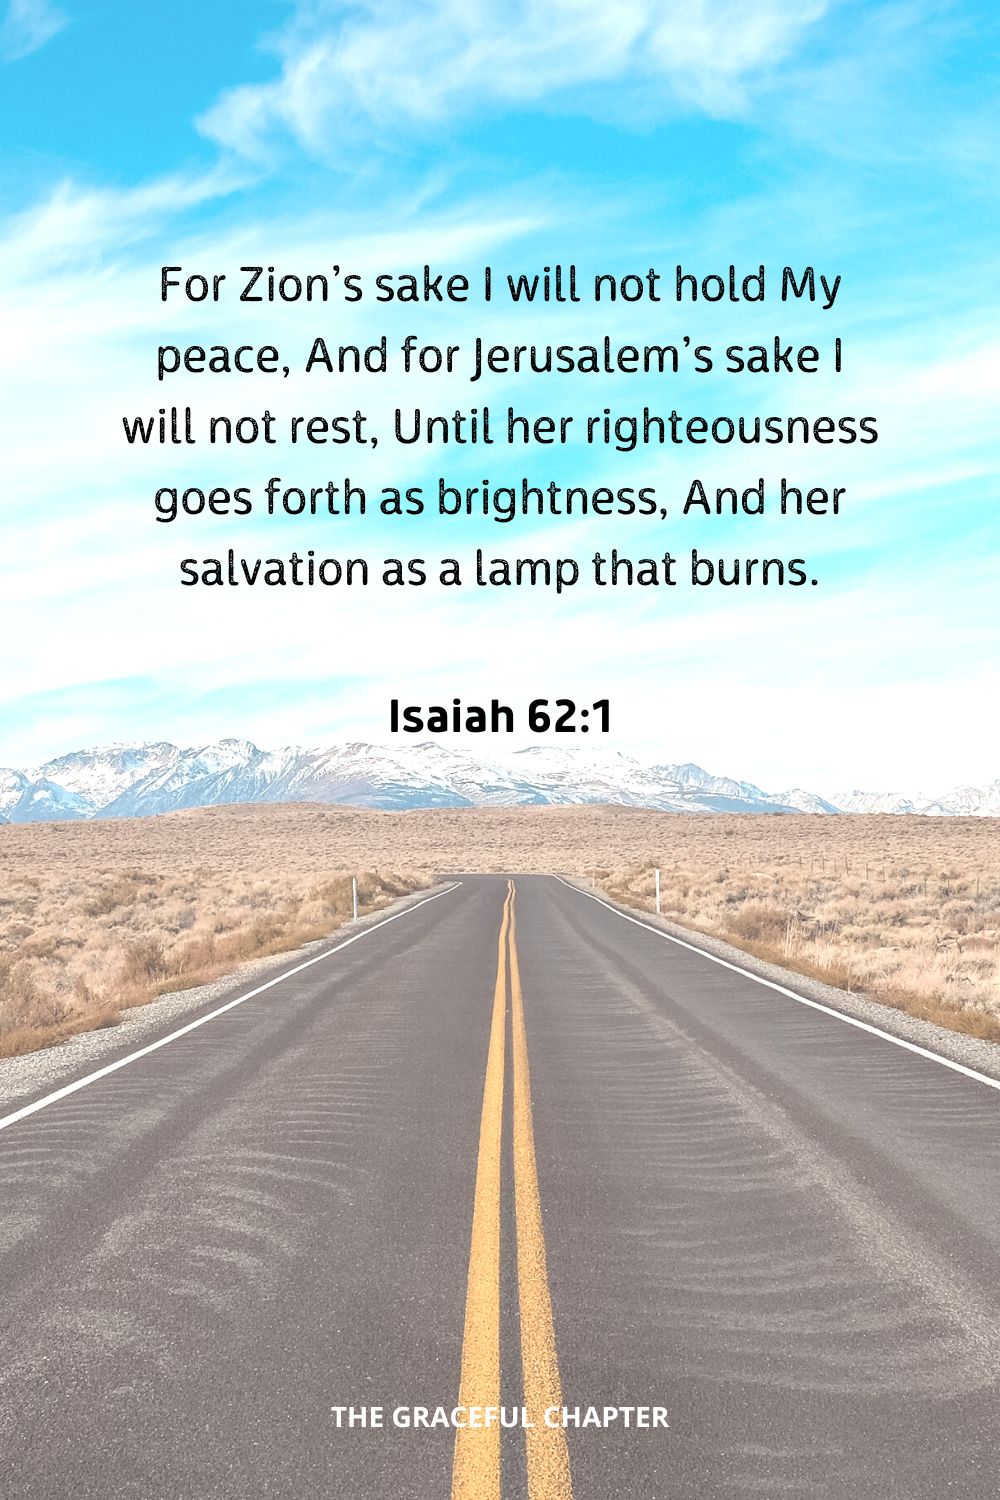 For Zion’s sake I will not hold My peace, And for Jerusalem’s sake I will not rest, Until her righteousness goes forth as brightness, And her salvation as a lamp that burns.